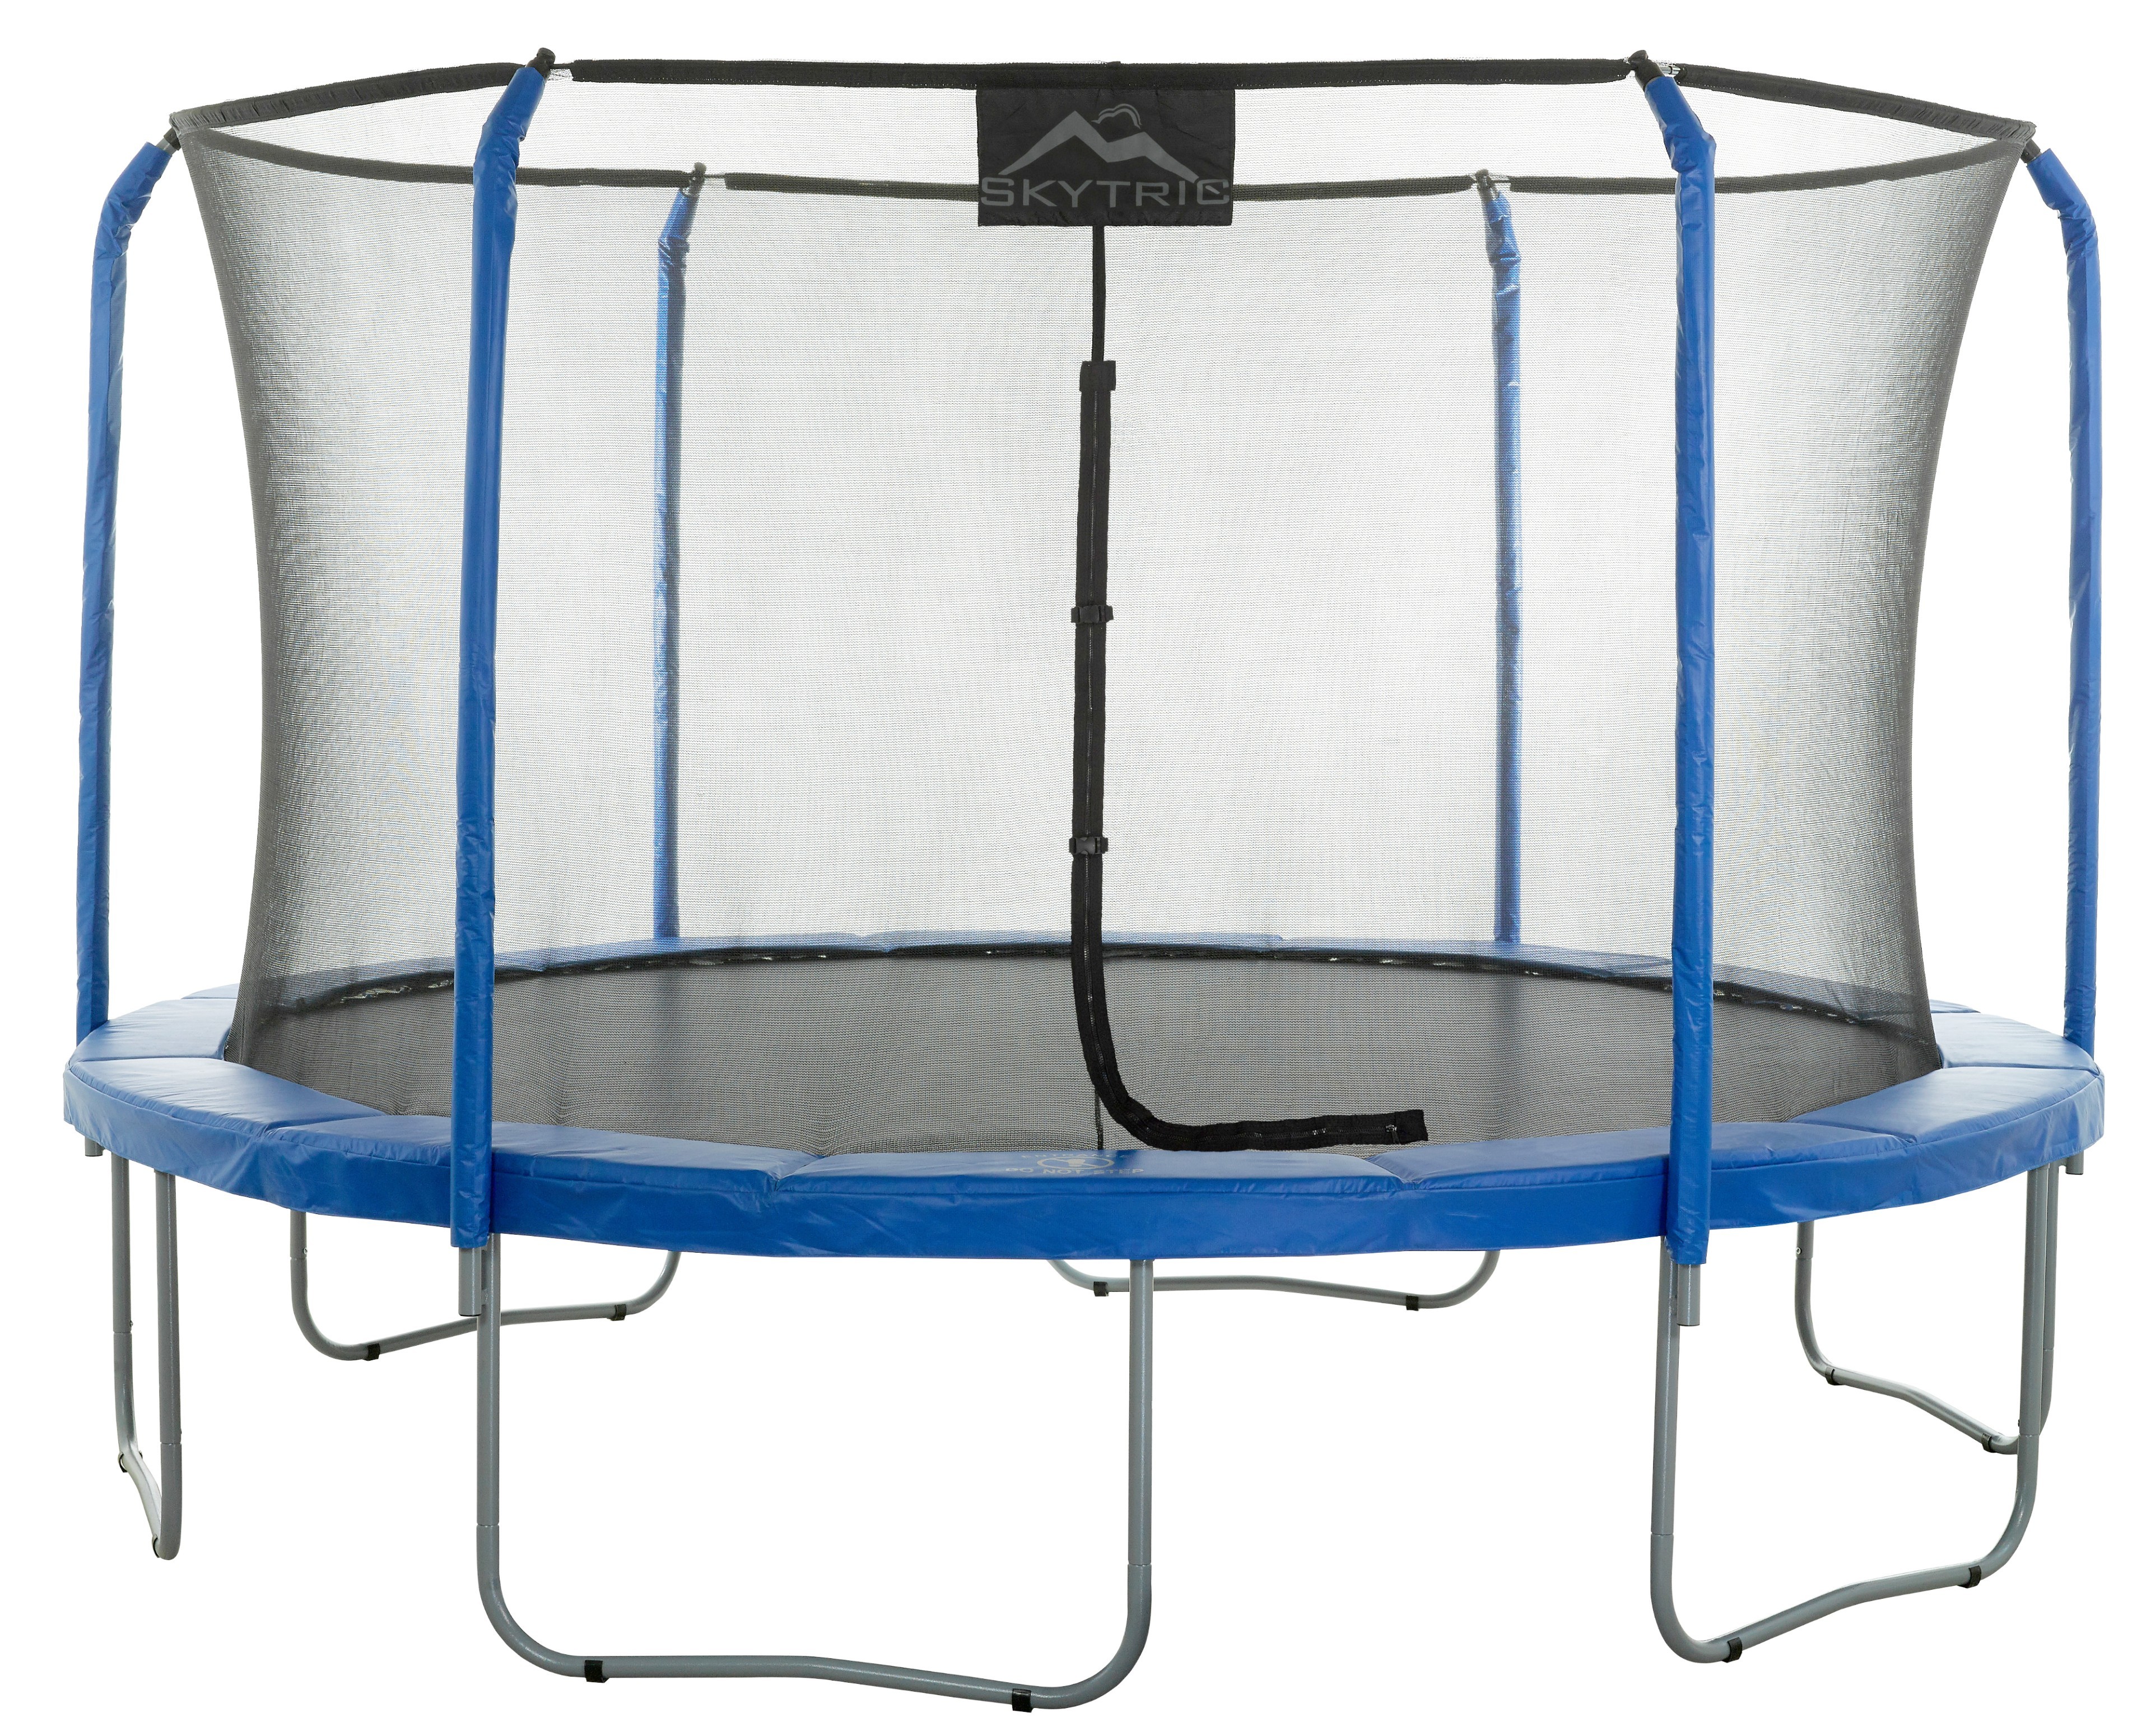 11Ft Large Trampoline and Enclosure Set | Garden & Outdoor Trampoline with Safety Net, Mat, Pad | Skytric